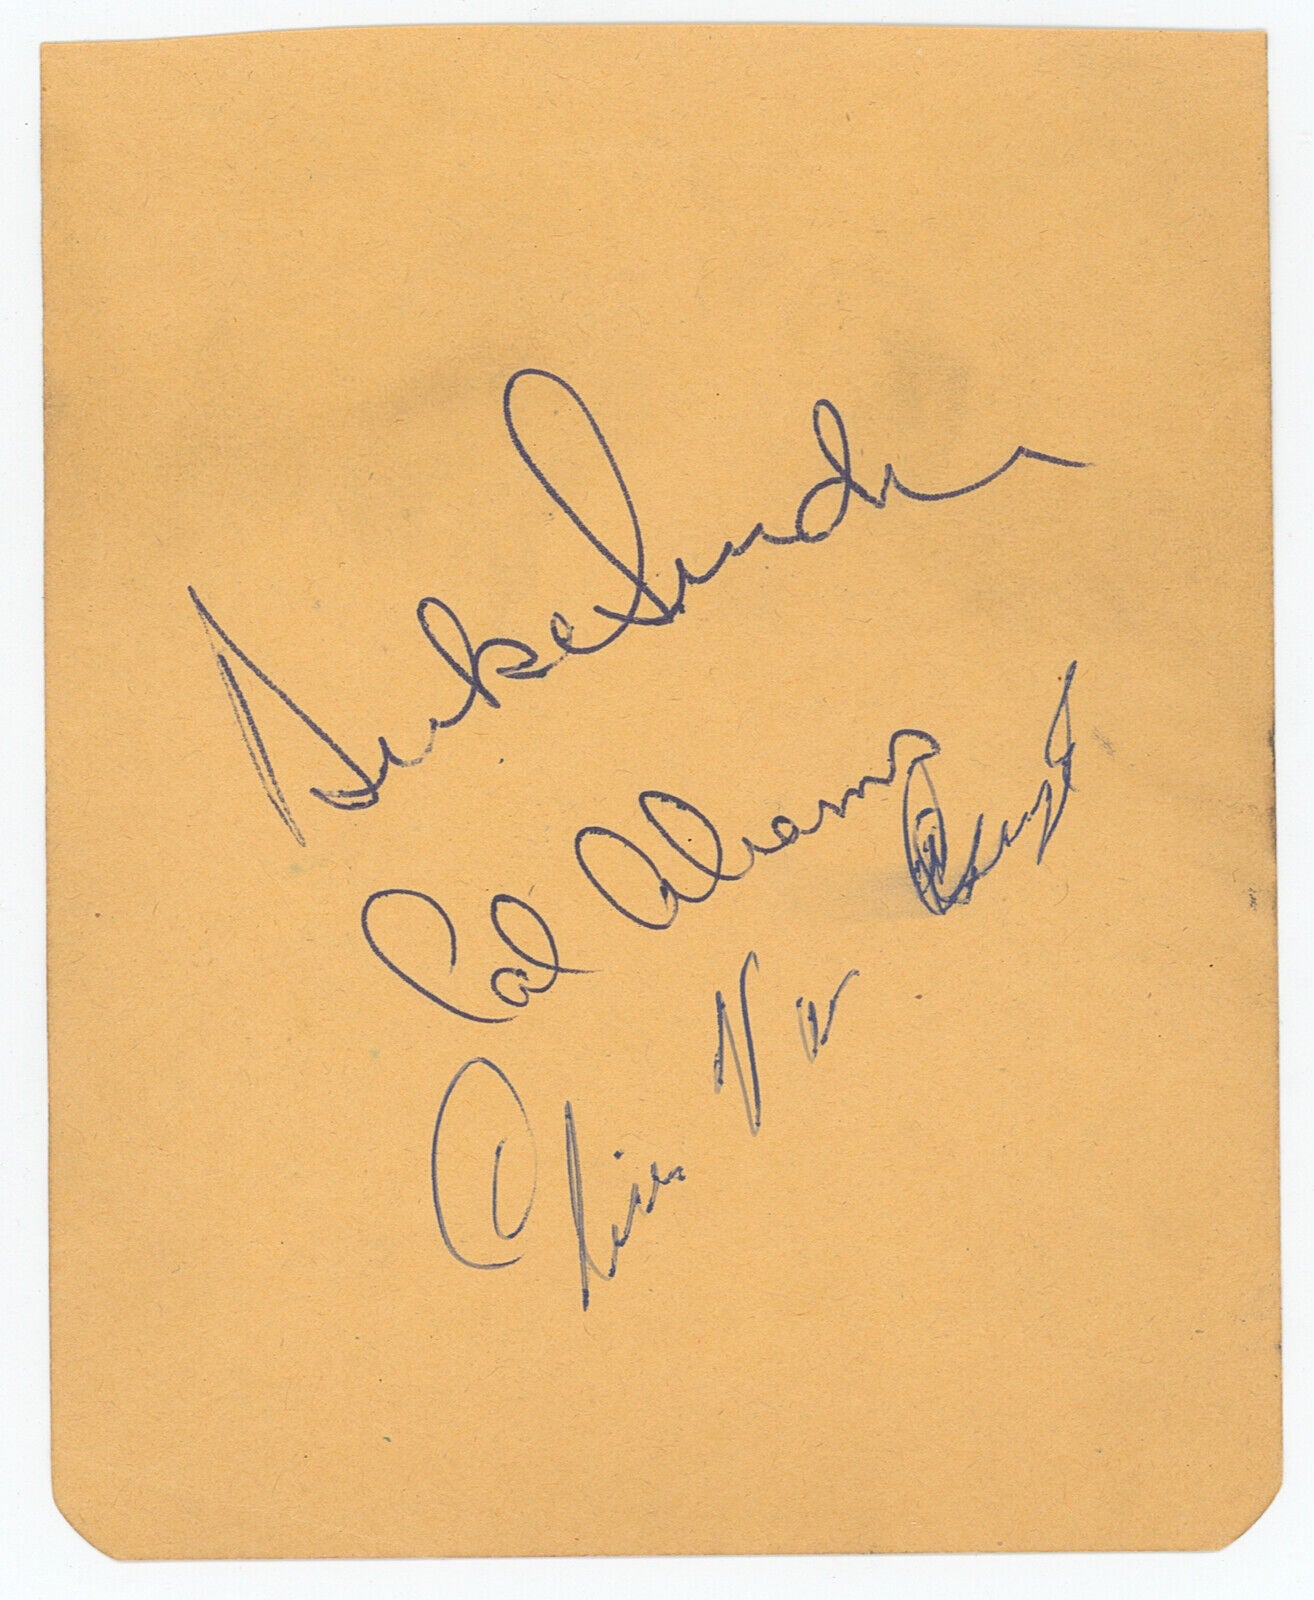 1950 Brooklyn Dodgers Duke Snider Signed Team Sheet Autograph Page.